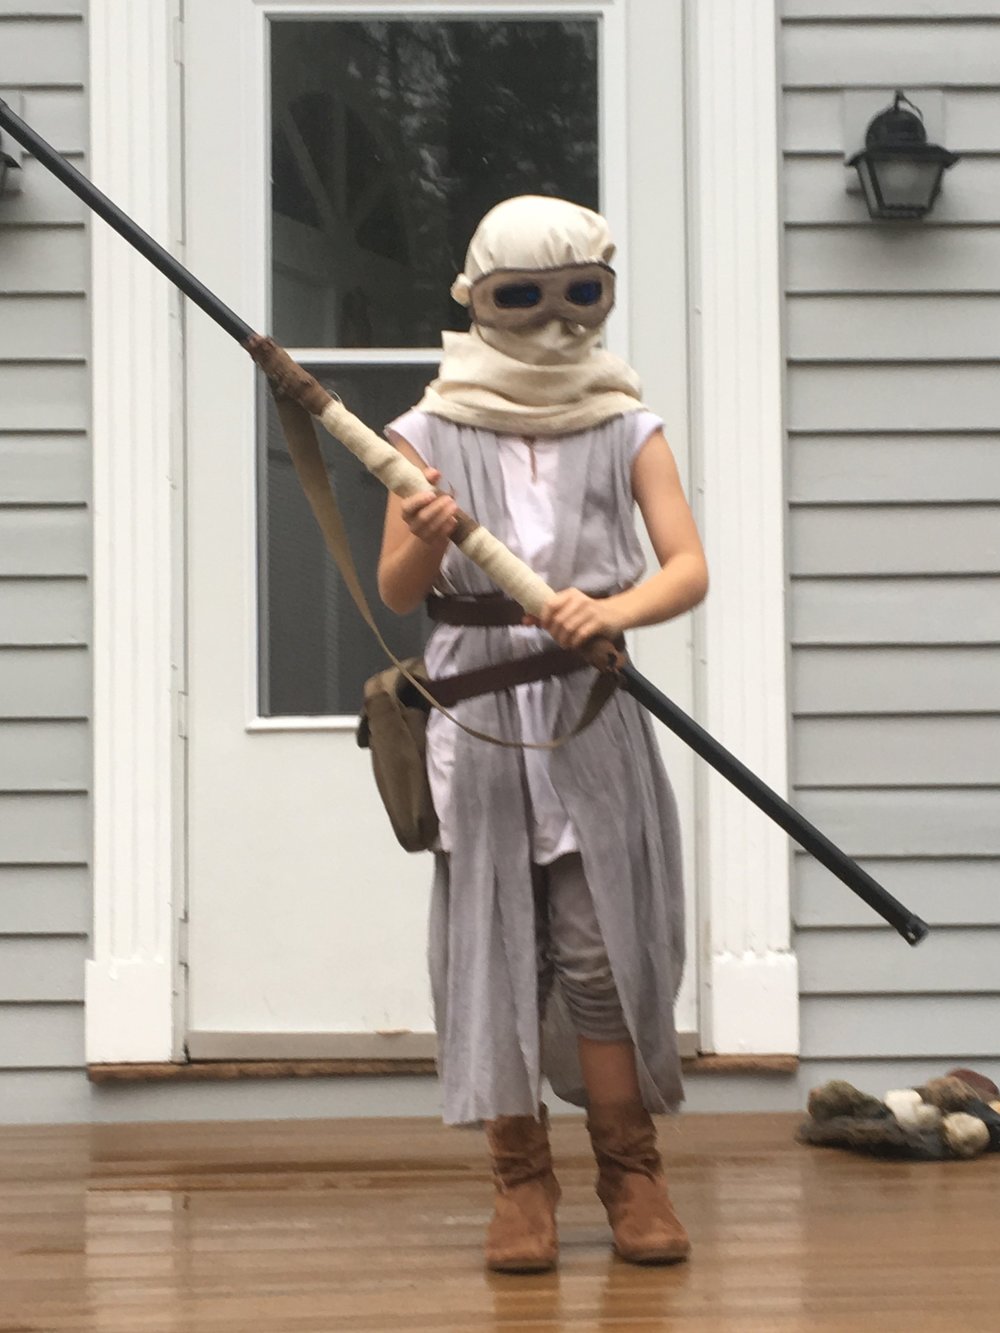  She kept the desert headgear on because it was cold and rainy that year, more like Endor than Jakku. 